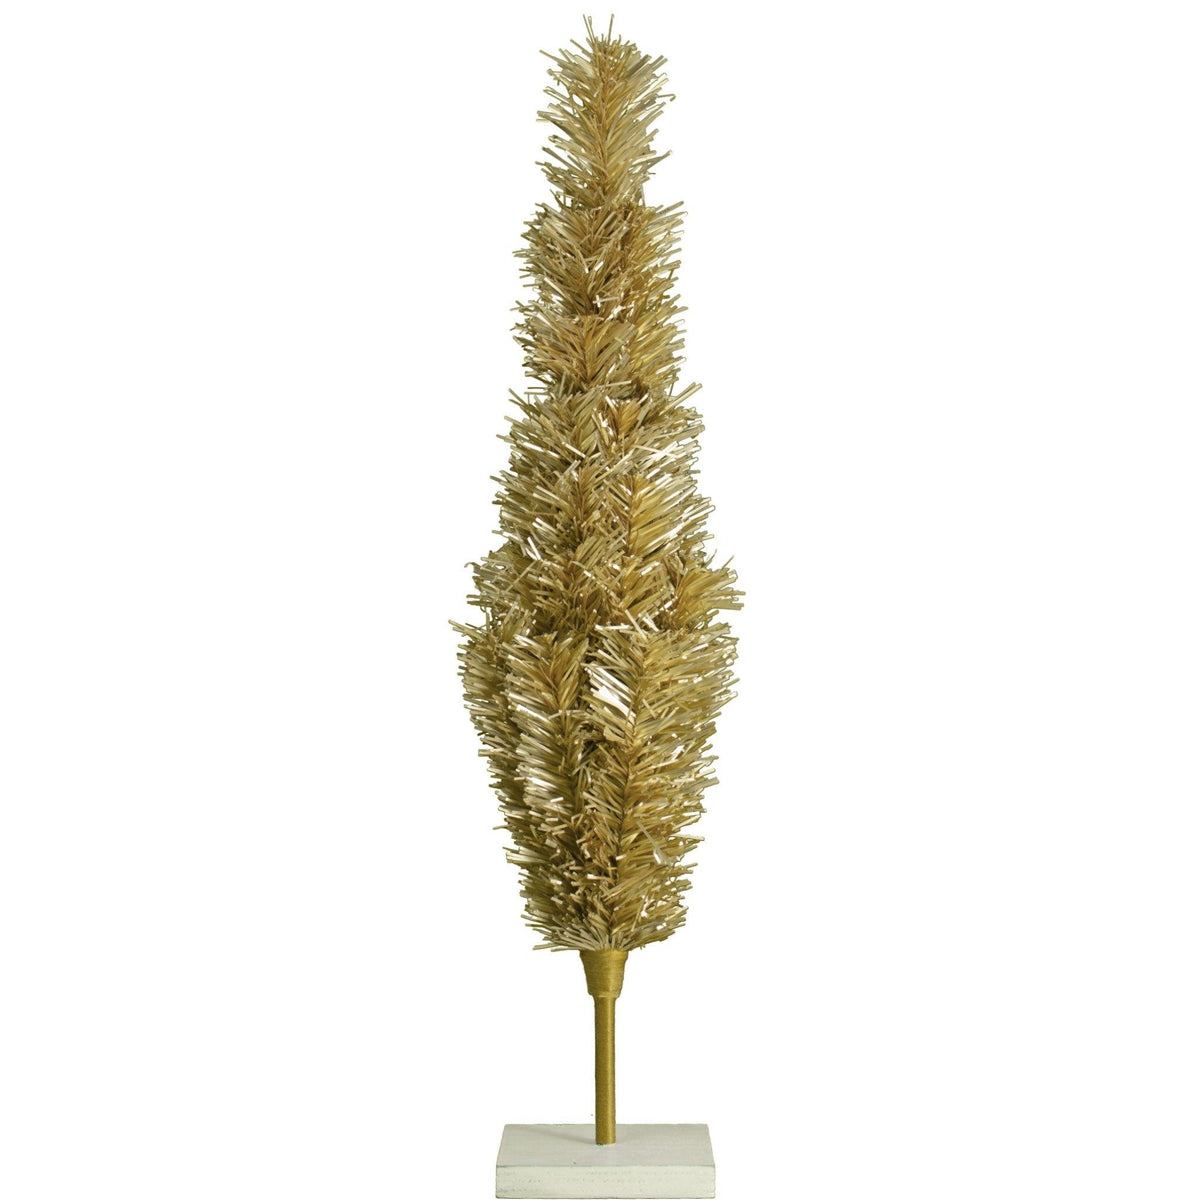 Our 24in Tall Antique Gold Christmas Tree has folding branches to shape how you like and safely store in your closet. 